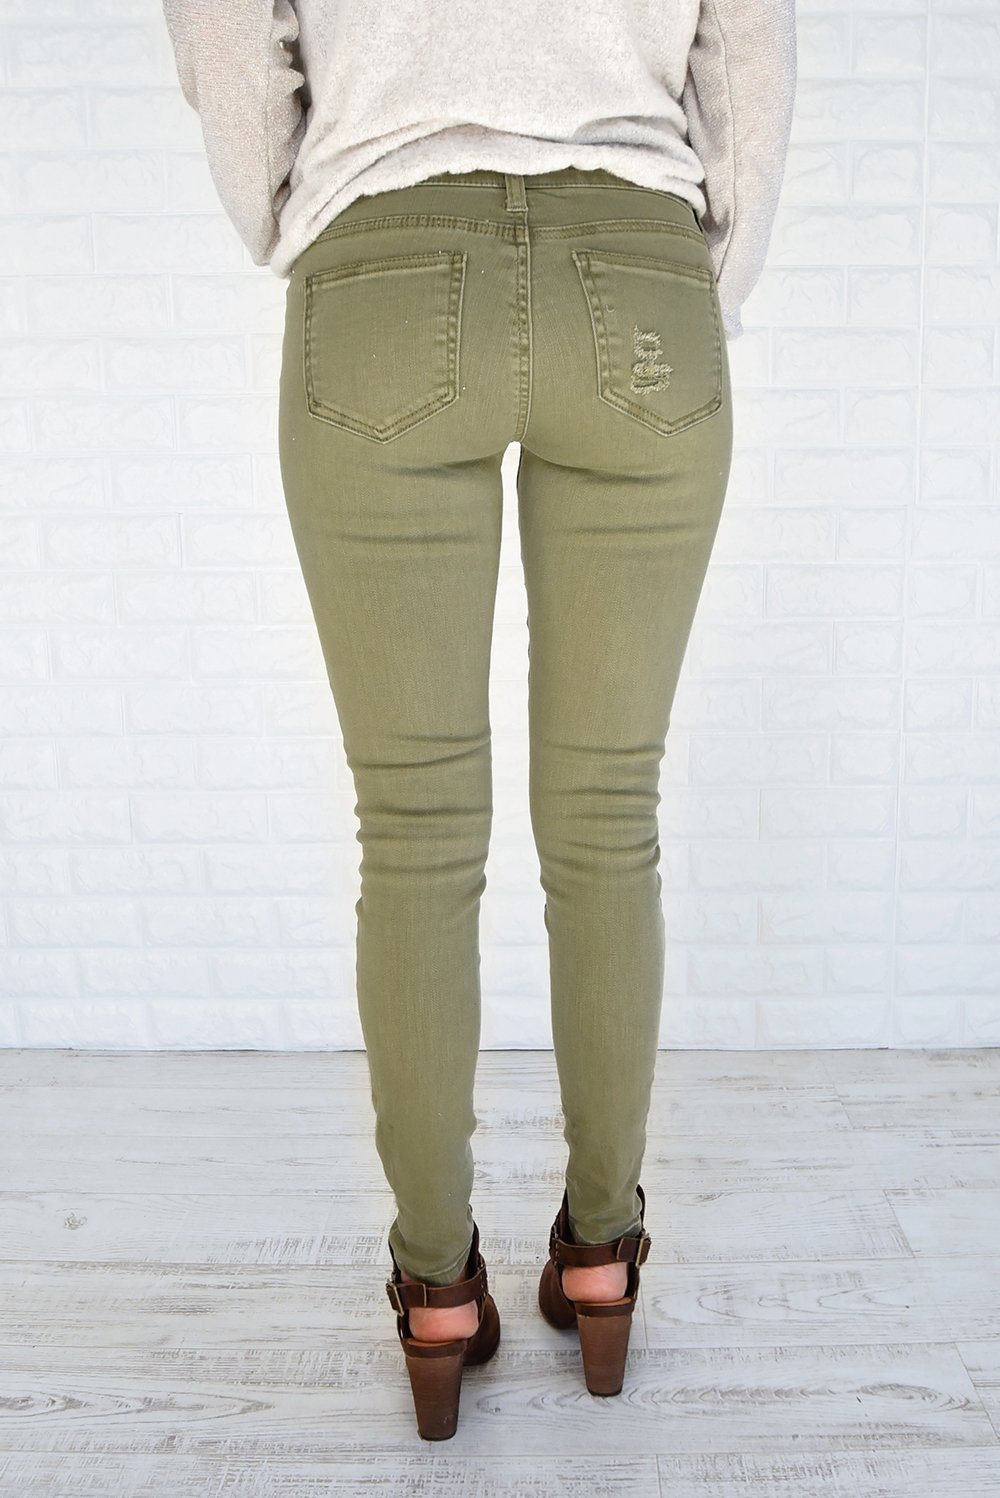 Distressed Olive Calypso Pants – The Pulse Boutique